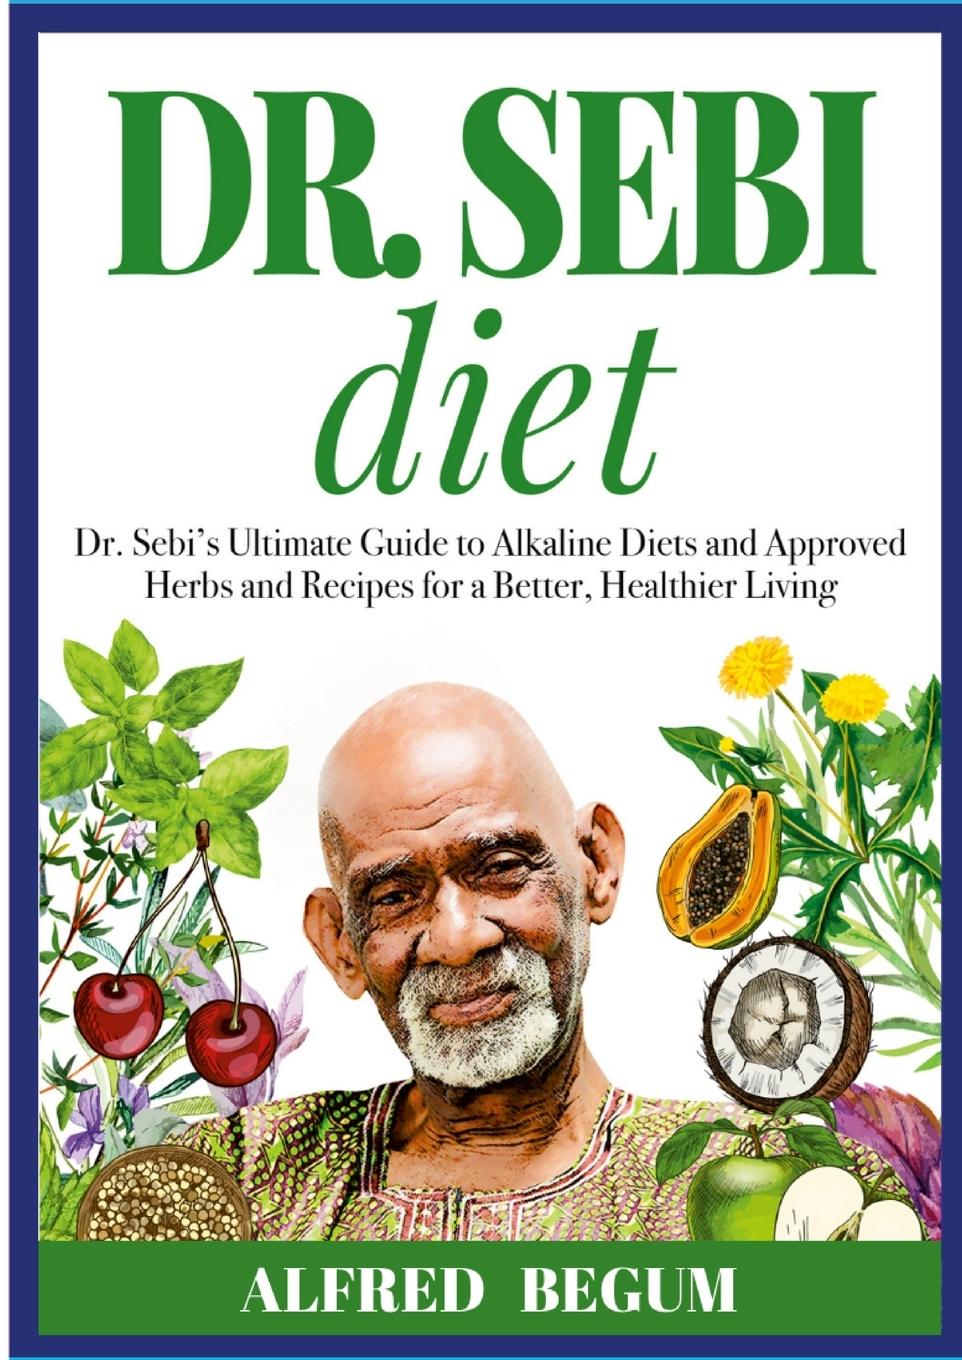 Książka DR. SEBI DIET. Dr. Sebi's Ultimate Guide to Alkaline Diets and Approved Herbs and Recipes for a Better, Healthier Living 